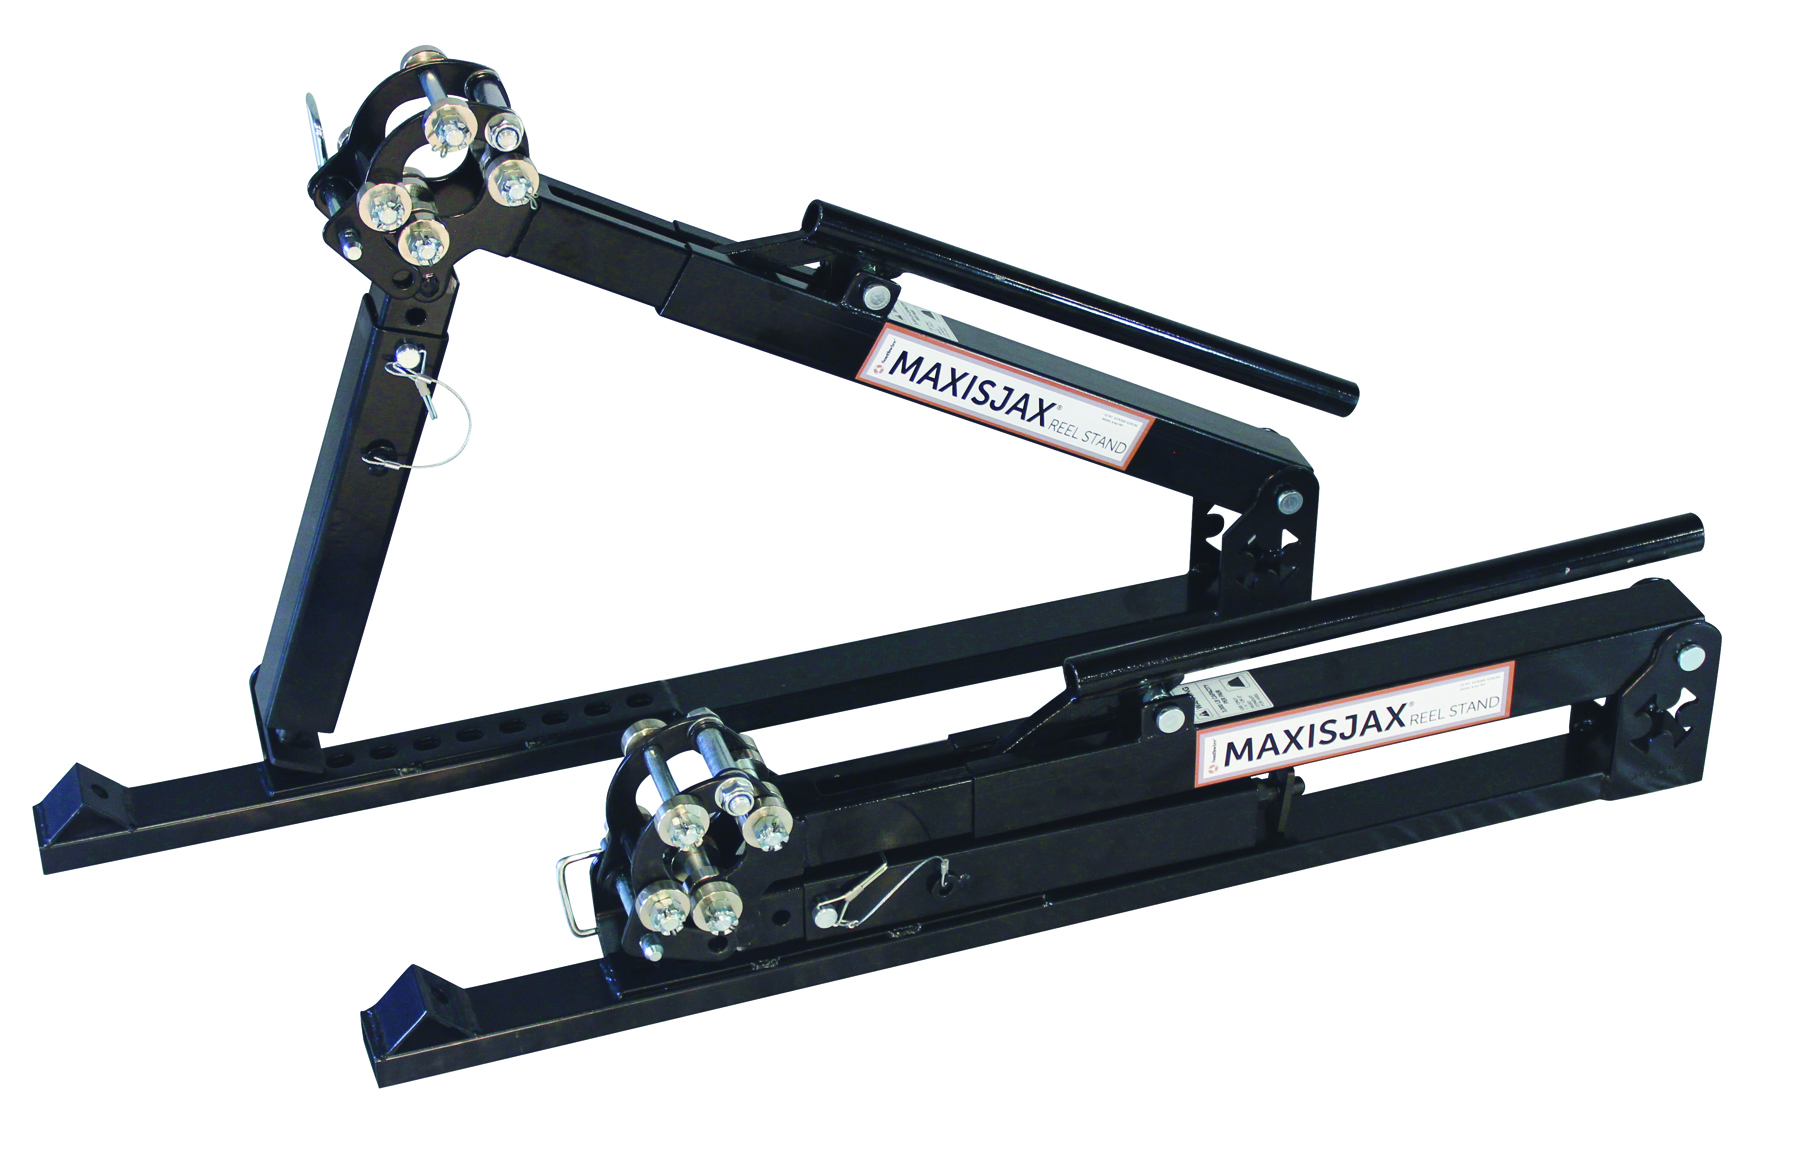 MJ-707 032886857829 A unique reel stand that will quickly set up and lift reels of wire safely and efficiently without the hassle of conventional reel stands. The MJ-707 is easy to store and transport, and can be broken down into a compact size for storage. Able to lift reels up to 3,000 lbs.